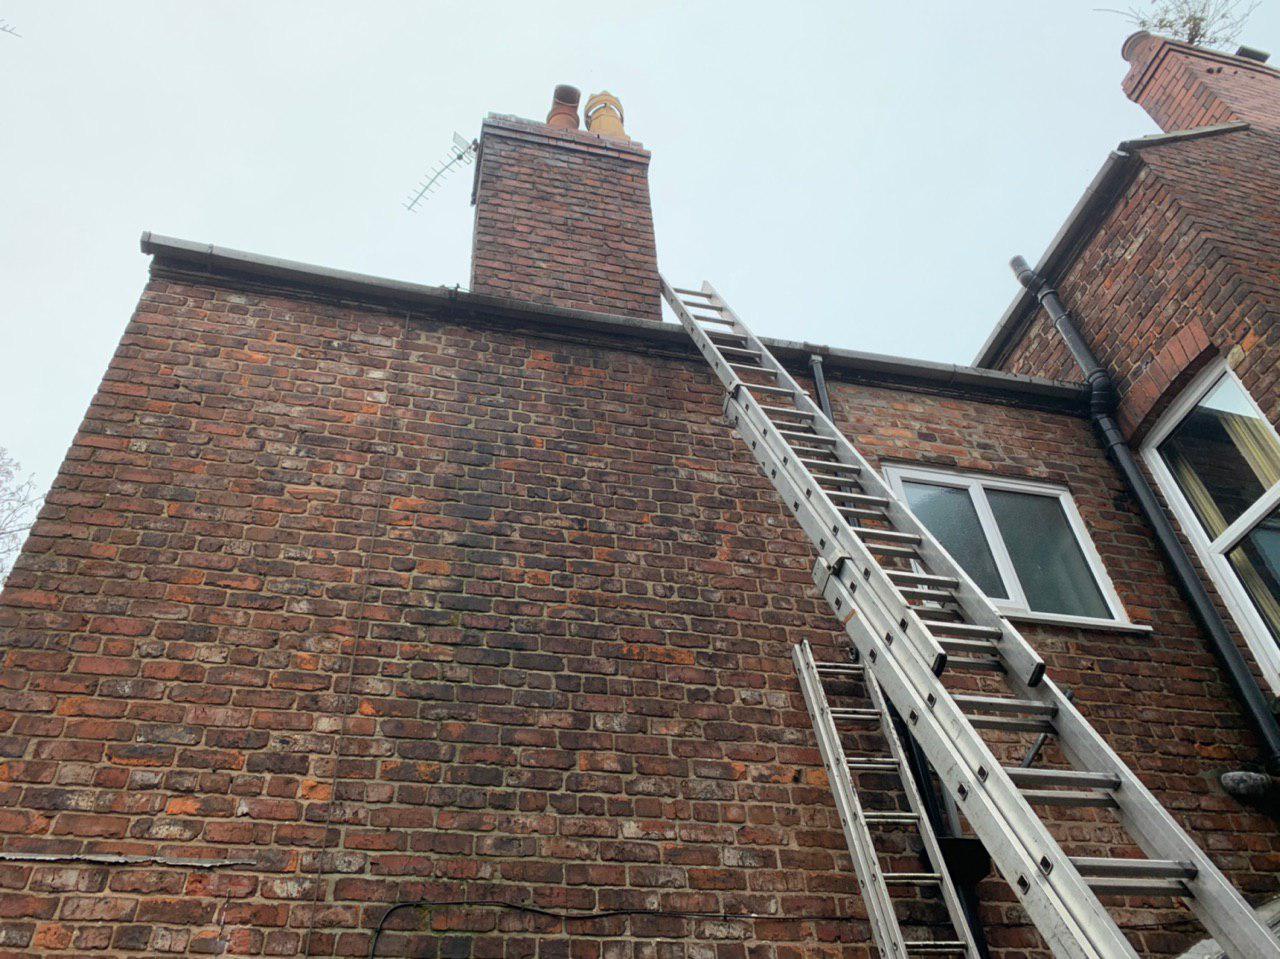 Gutters & down-pipes cleared out, we can repair or replace for new where required. Get your property ready for winter